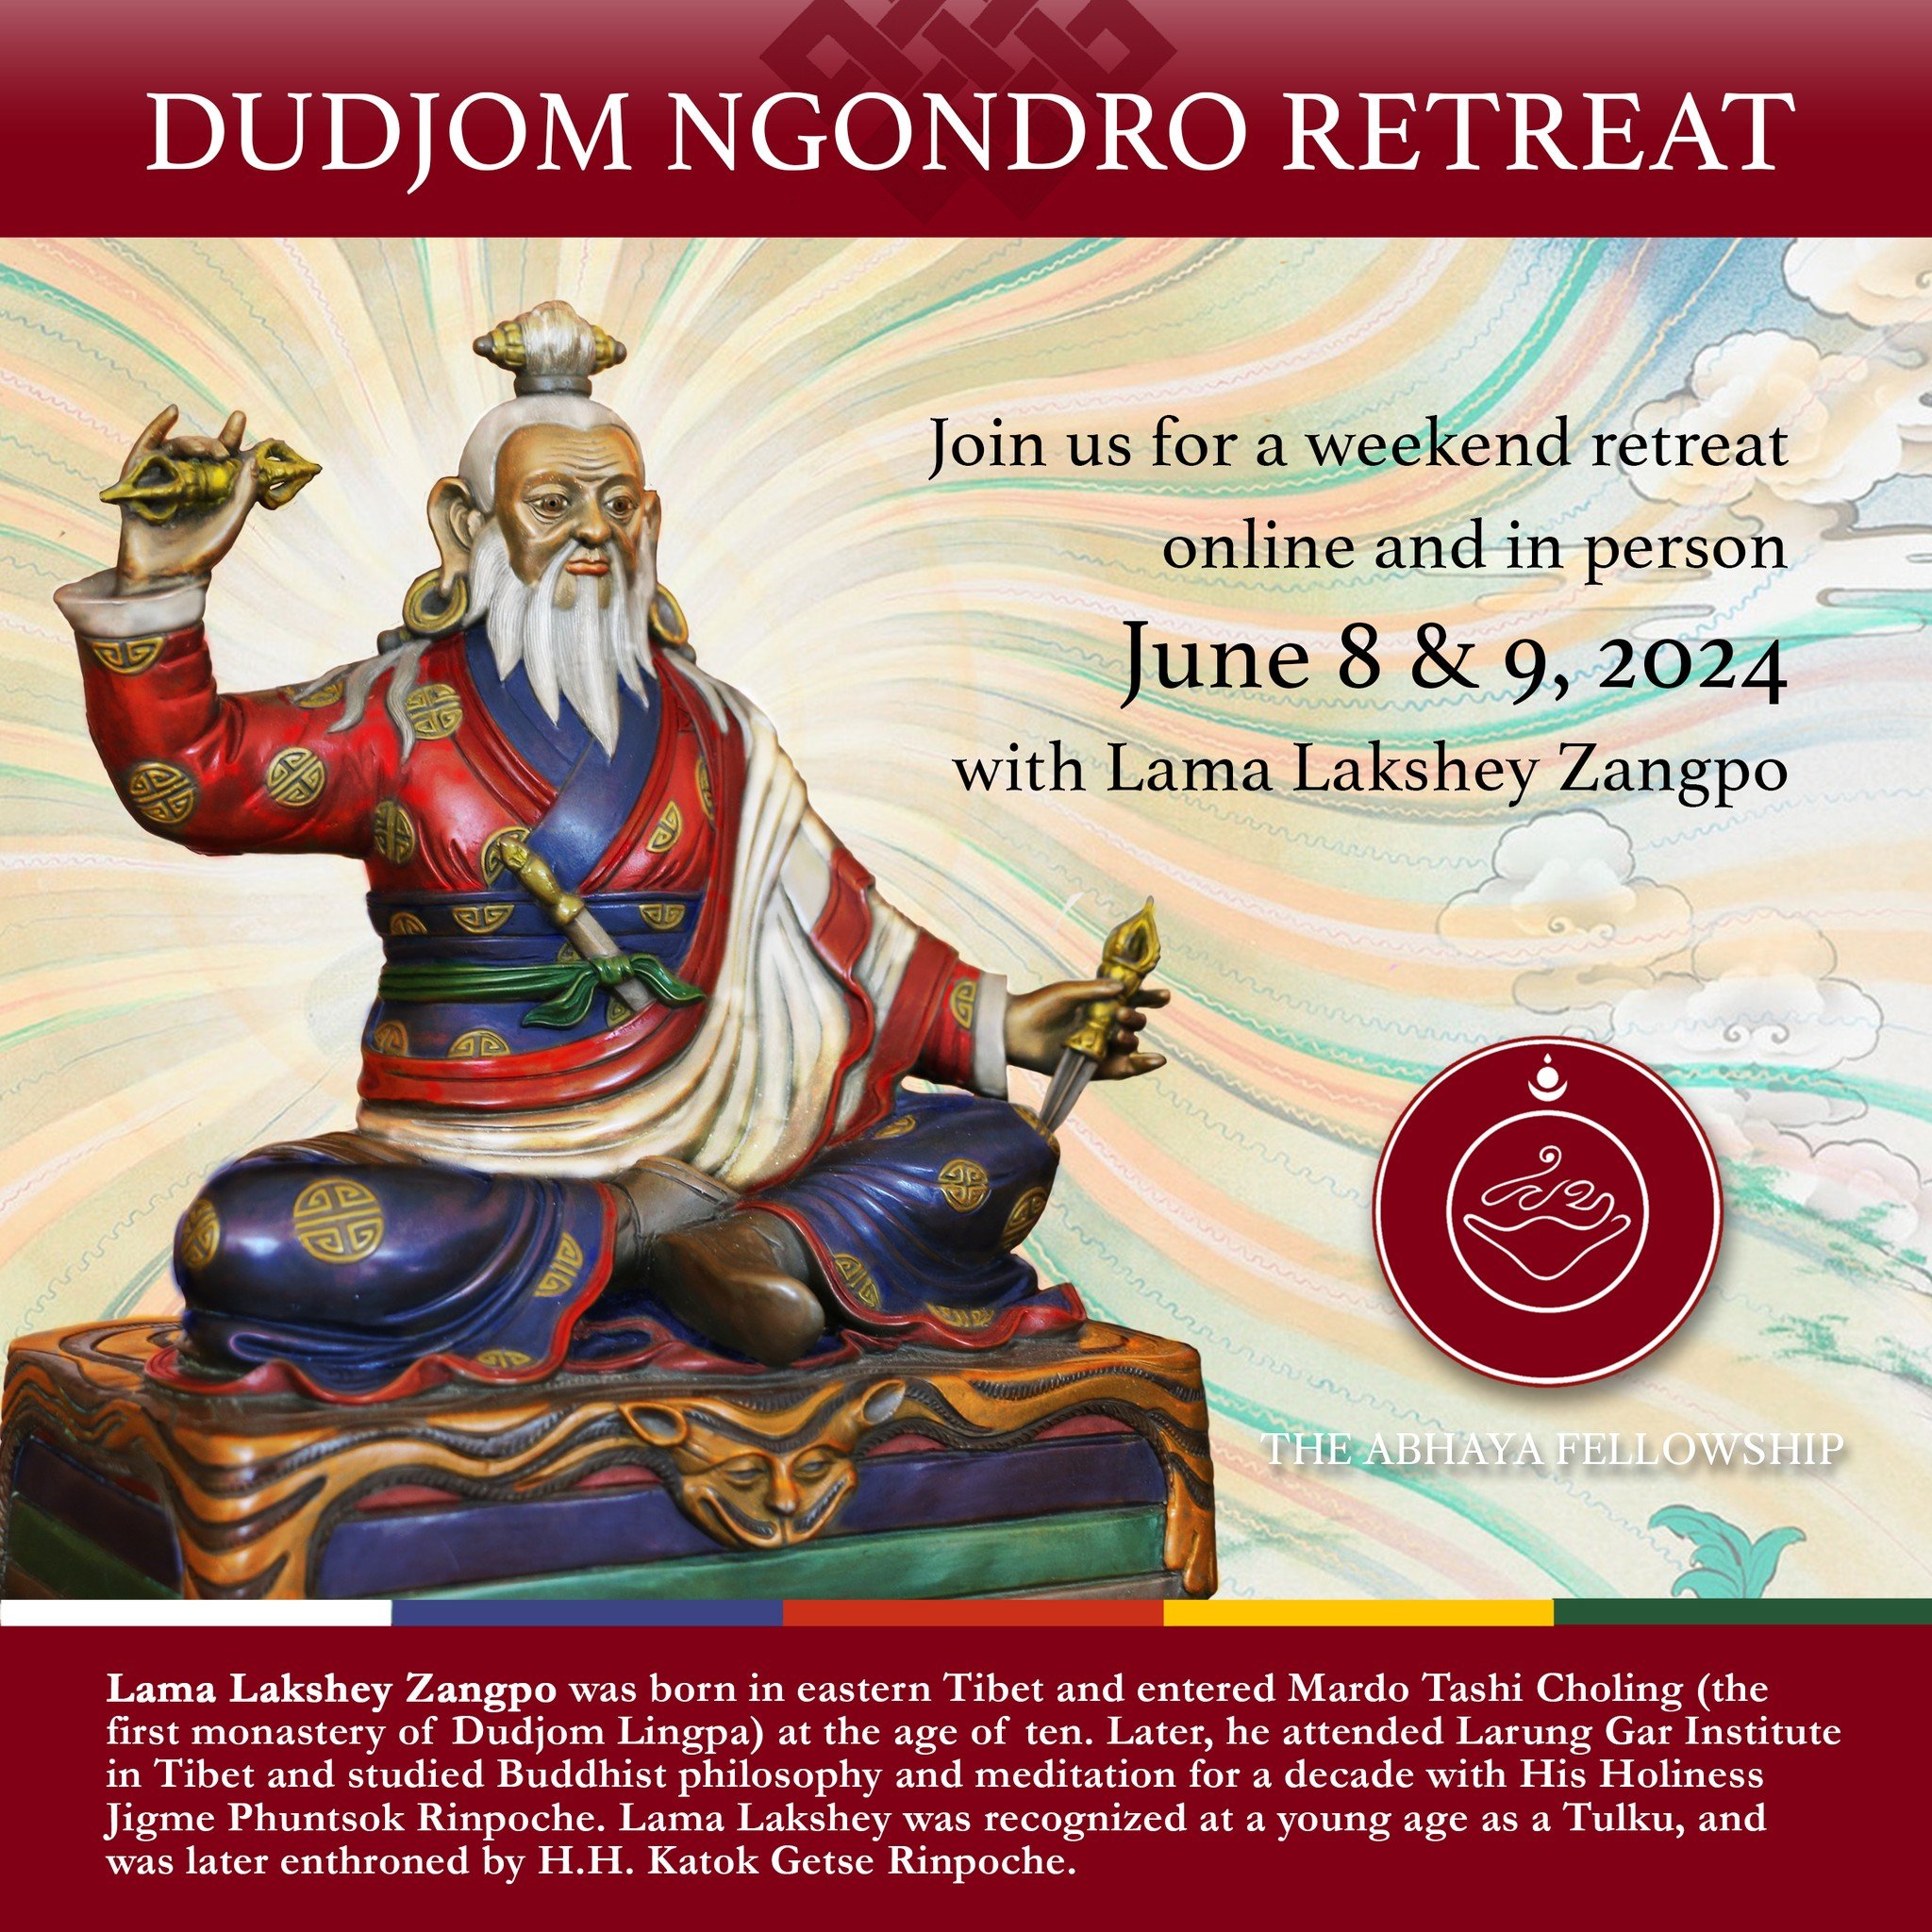 Lama Lakshey Zangpo is known for his kindness, good humor and penetrating insight.  Join us for a very special opportunity to learn the concise Dudjom Tersar Ngondro from a beloved and esteemed lama.

Register: https://events.humanitix.com/dudjom-ngo